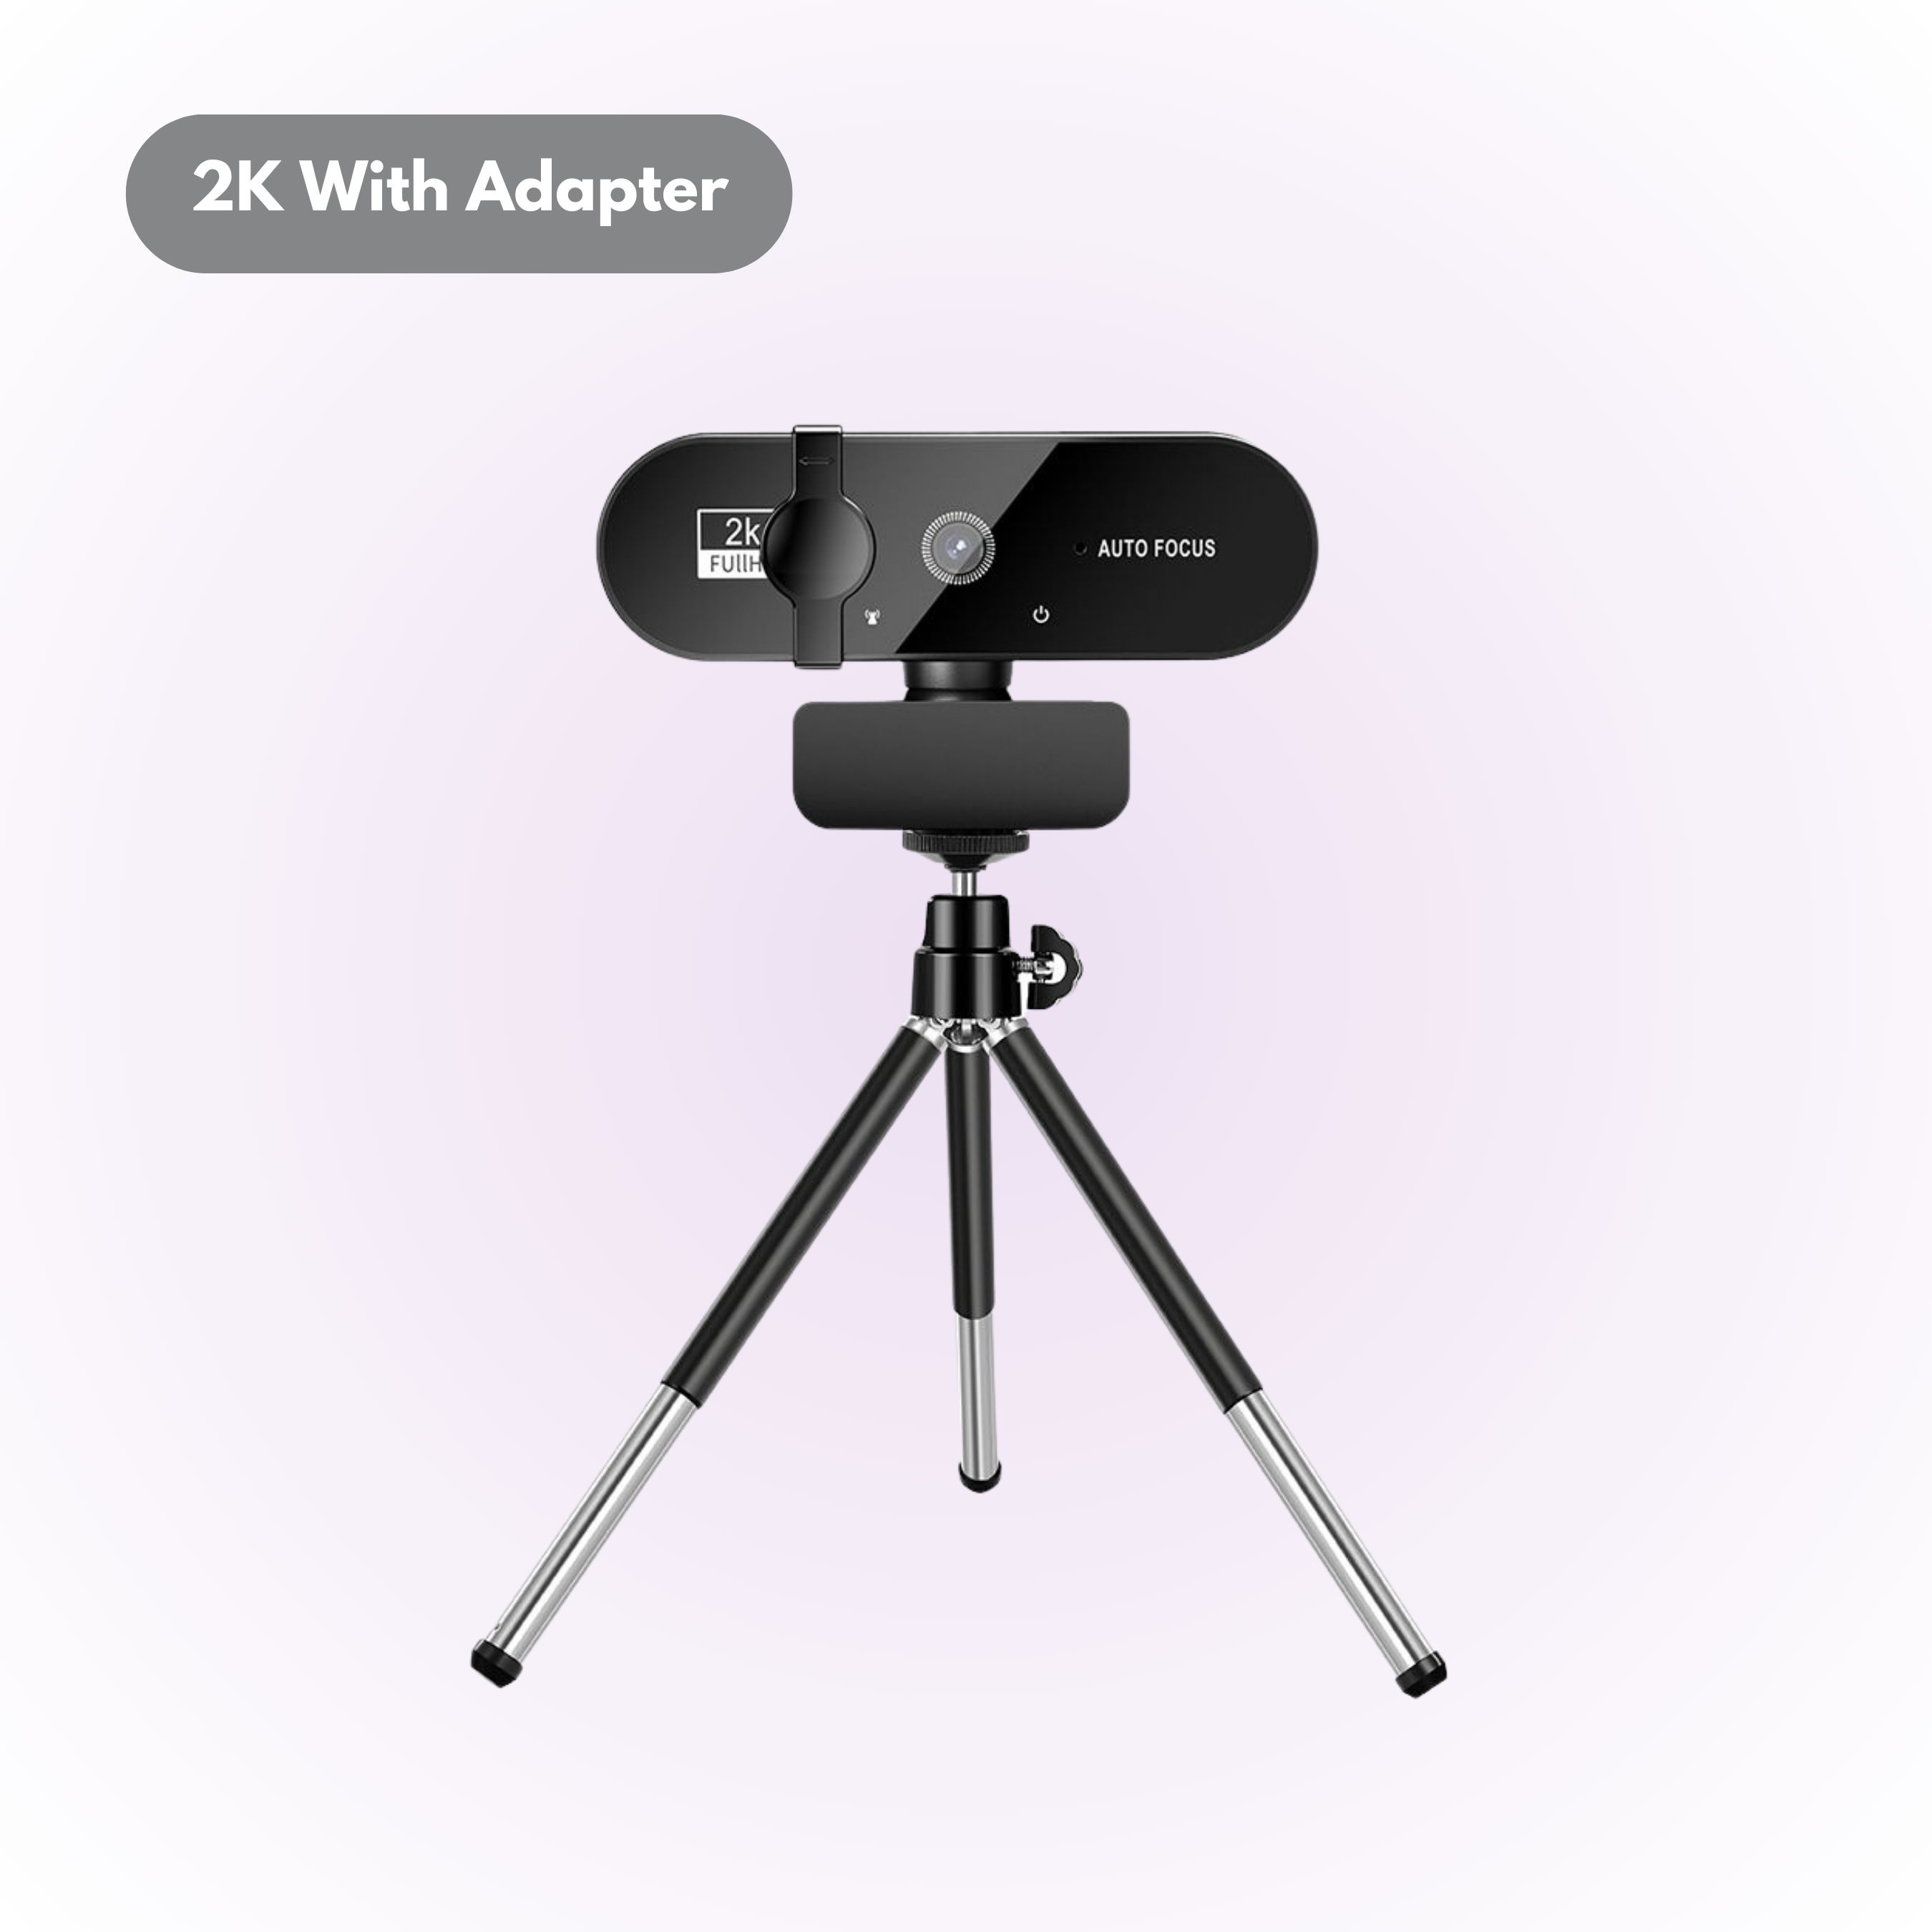 2k full hd Webcam with Built-in Microphone with tripod